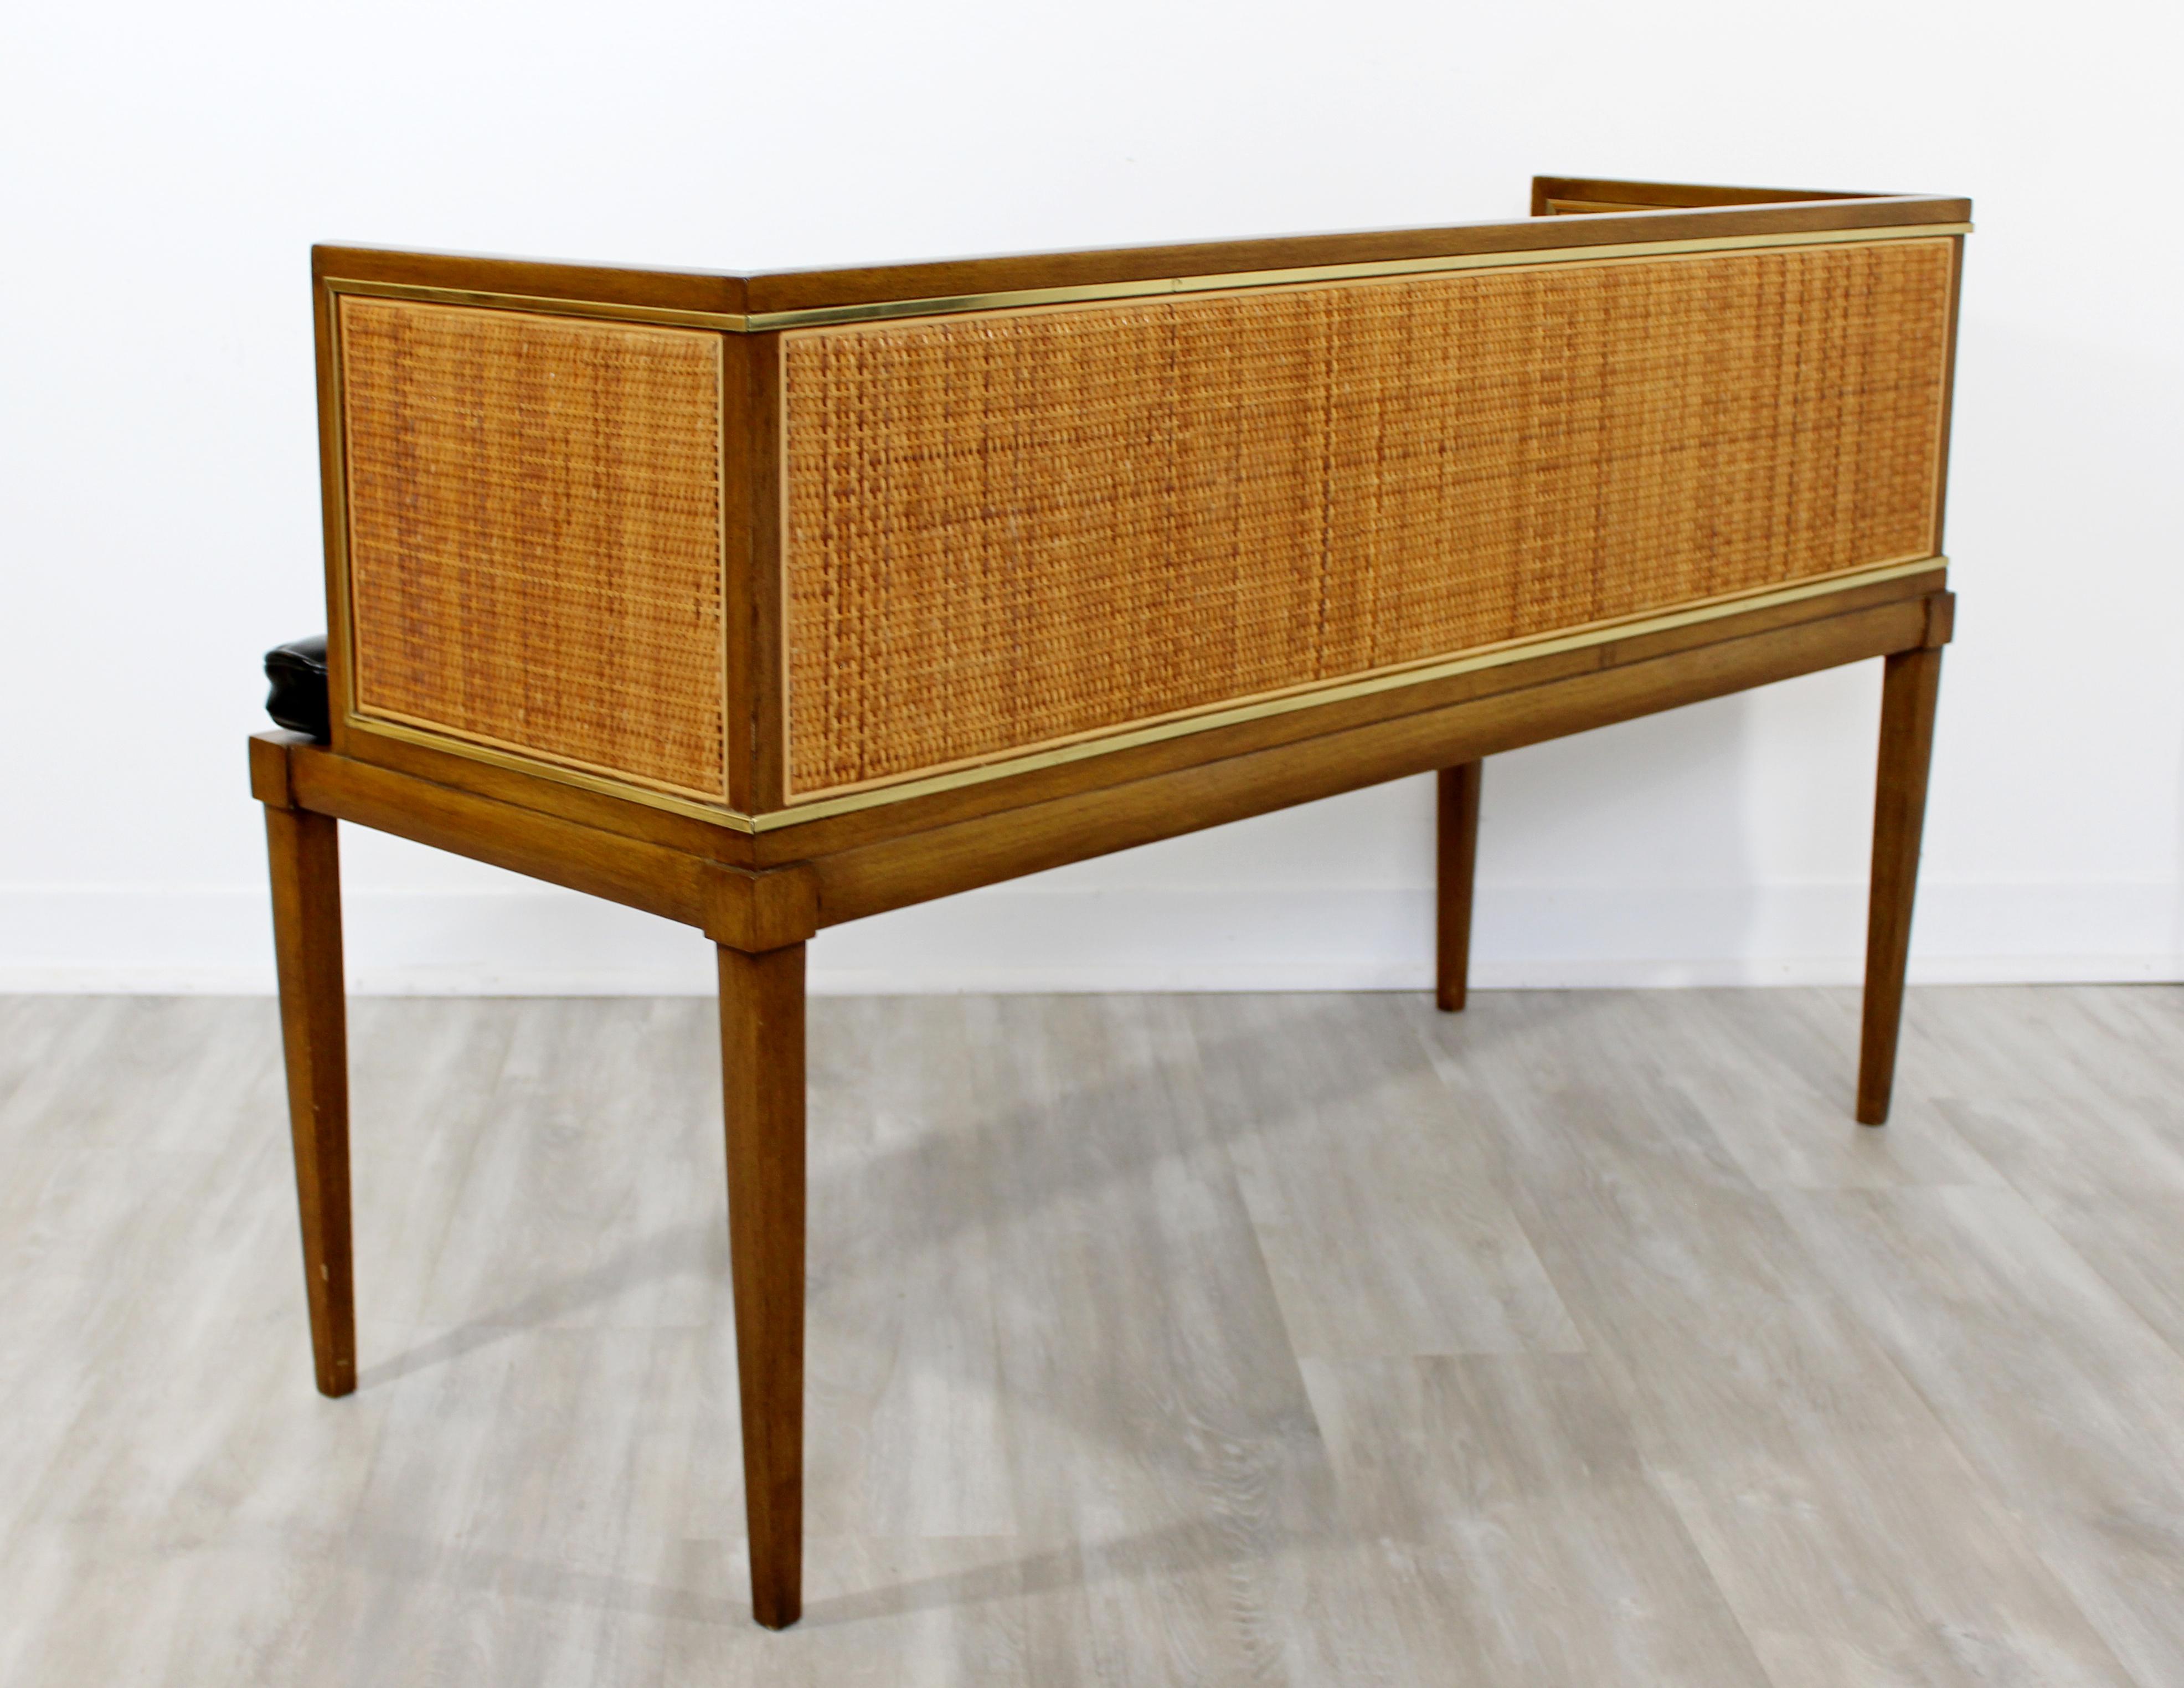 Mid-20th Century Mid-Century Modern Danish Style Wood Cane Brass Leather Bench Settee, 1960s